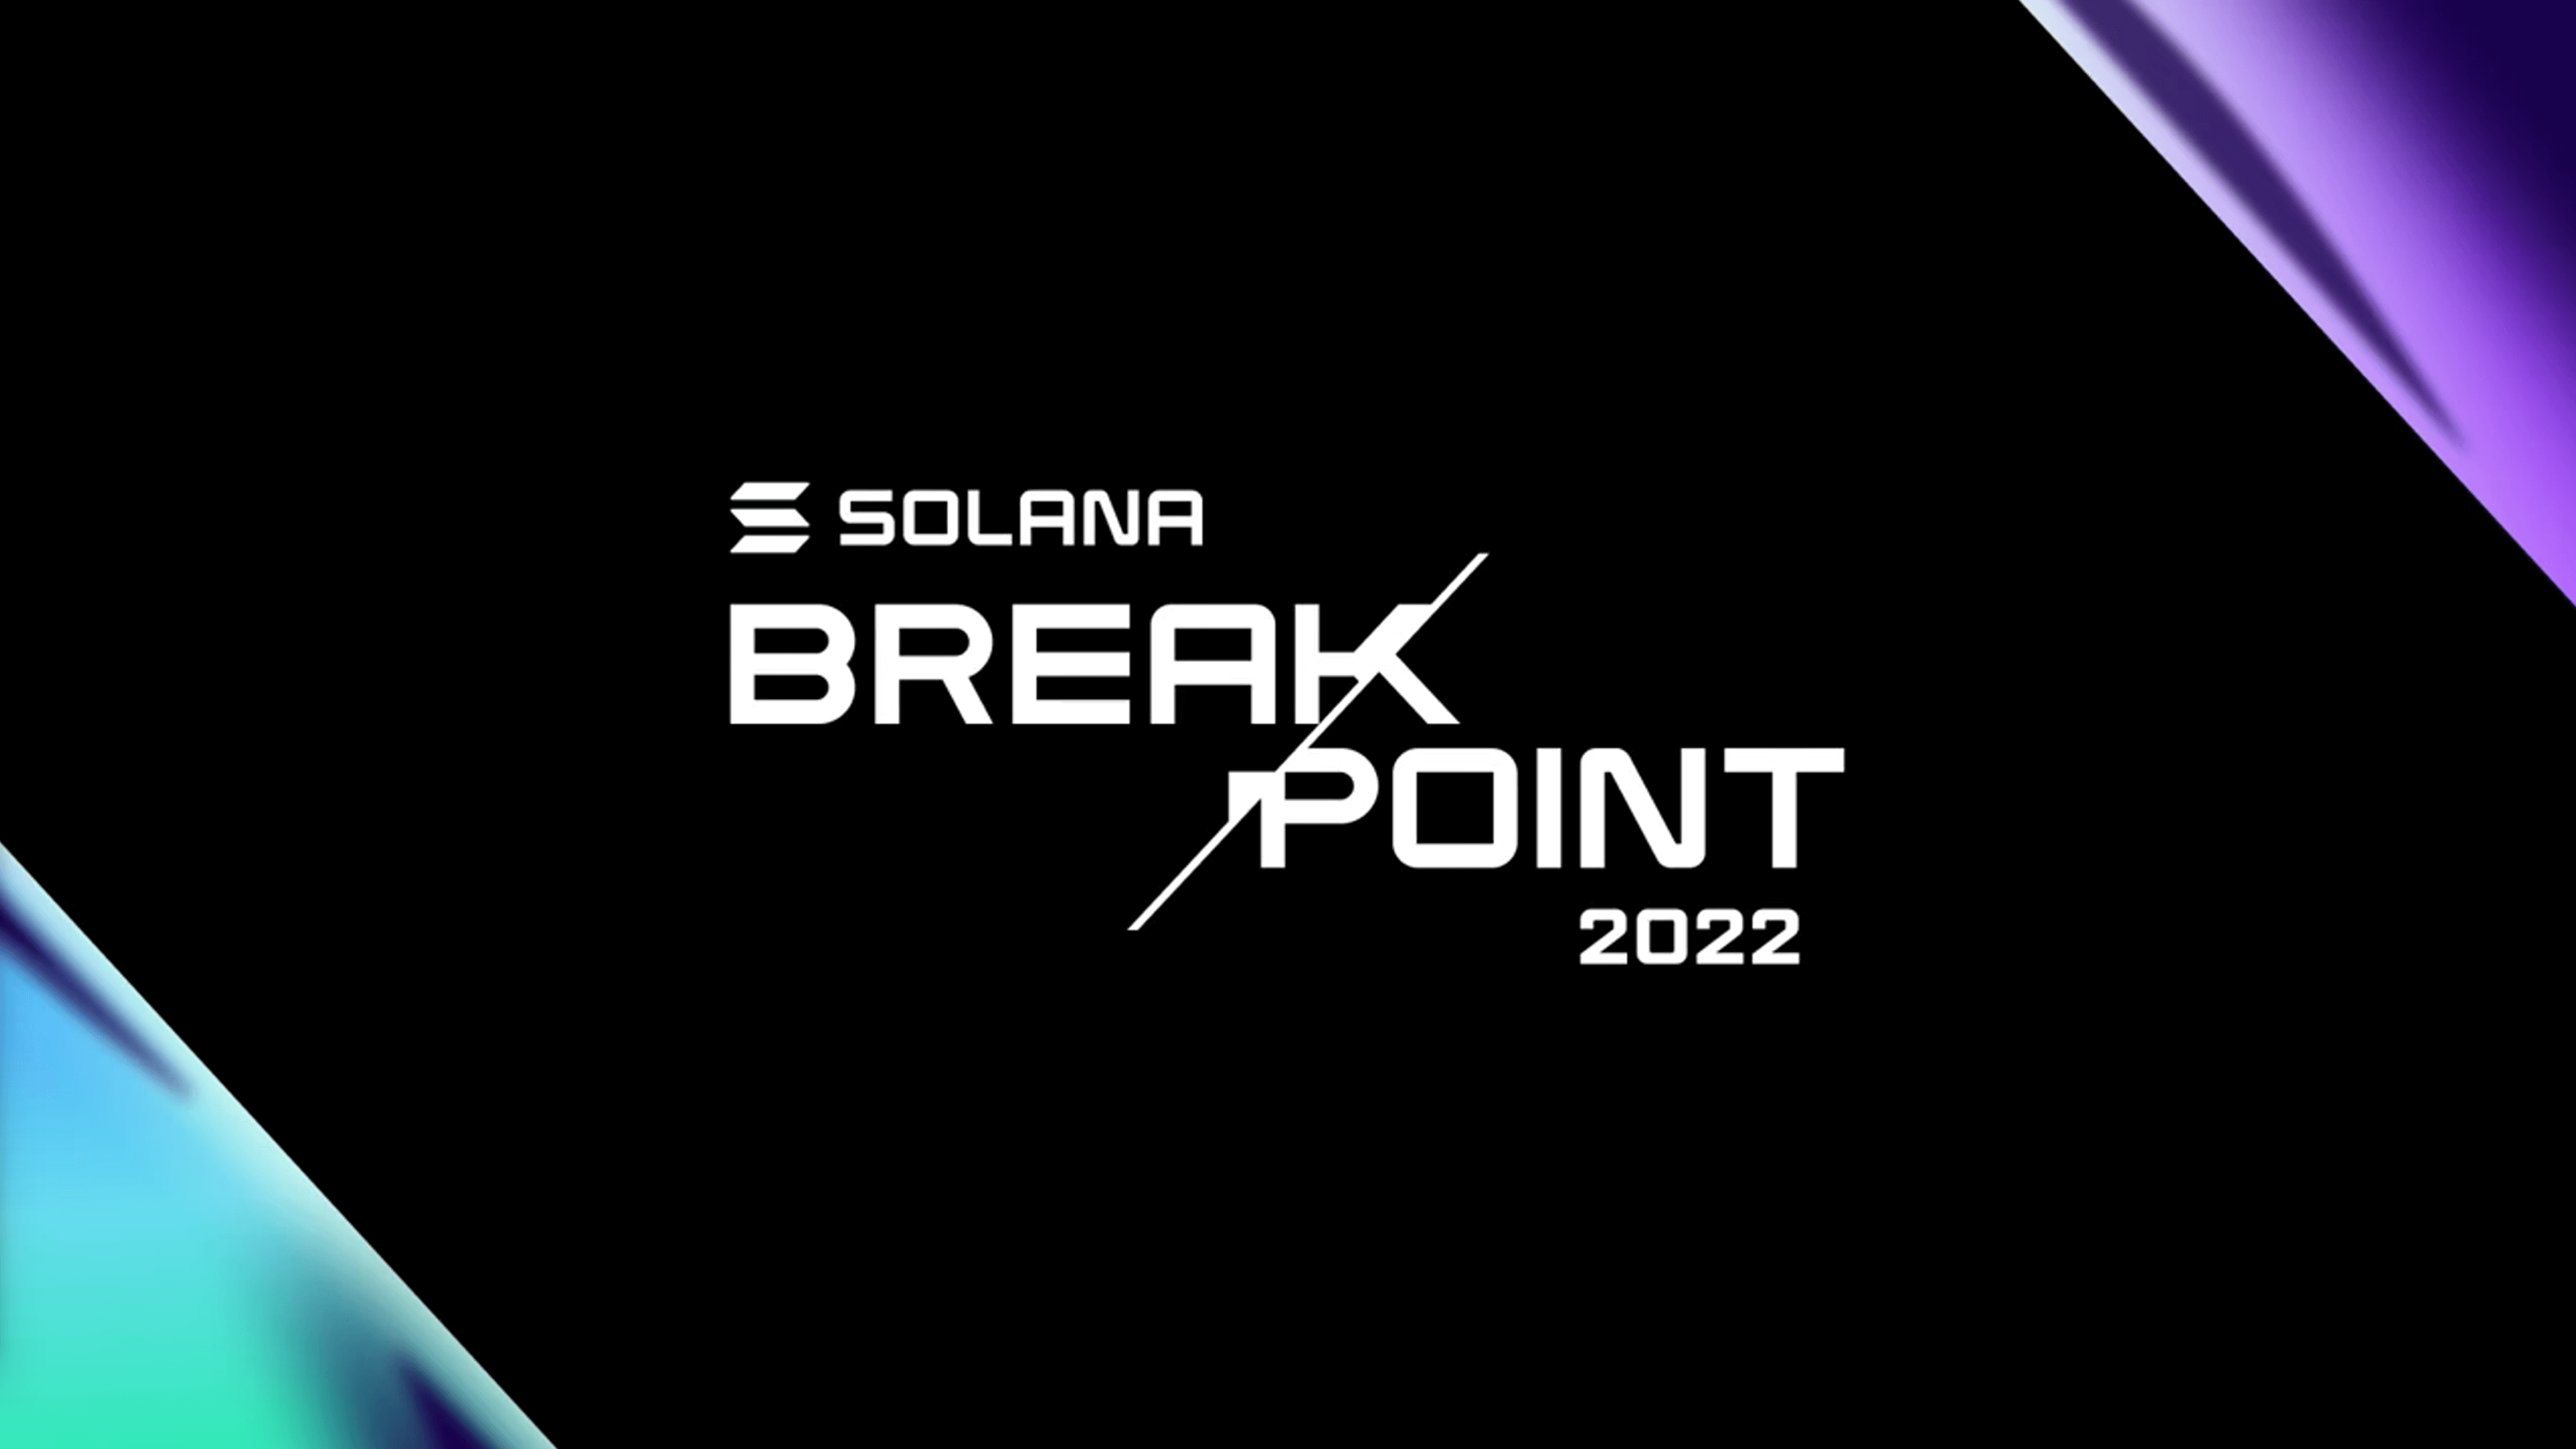 SolanaBreakpoint2022.png